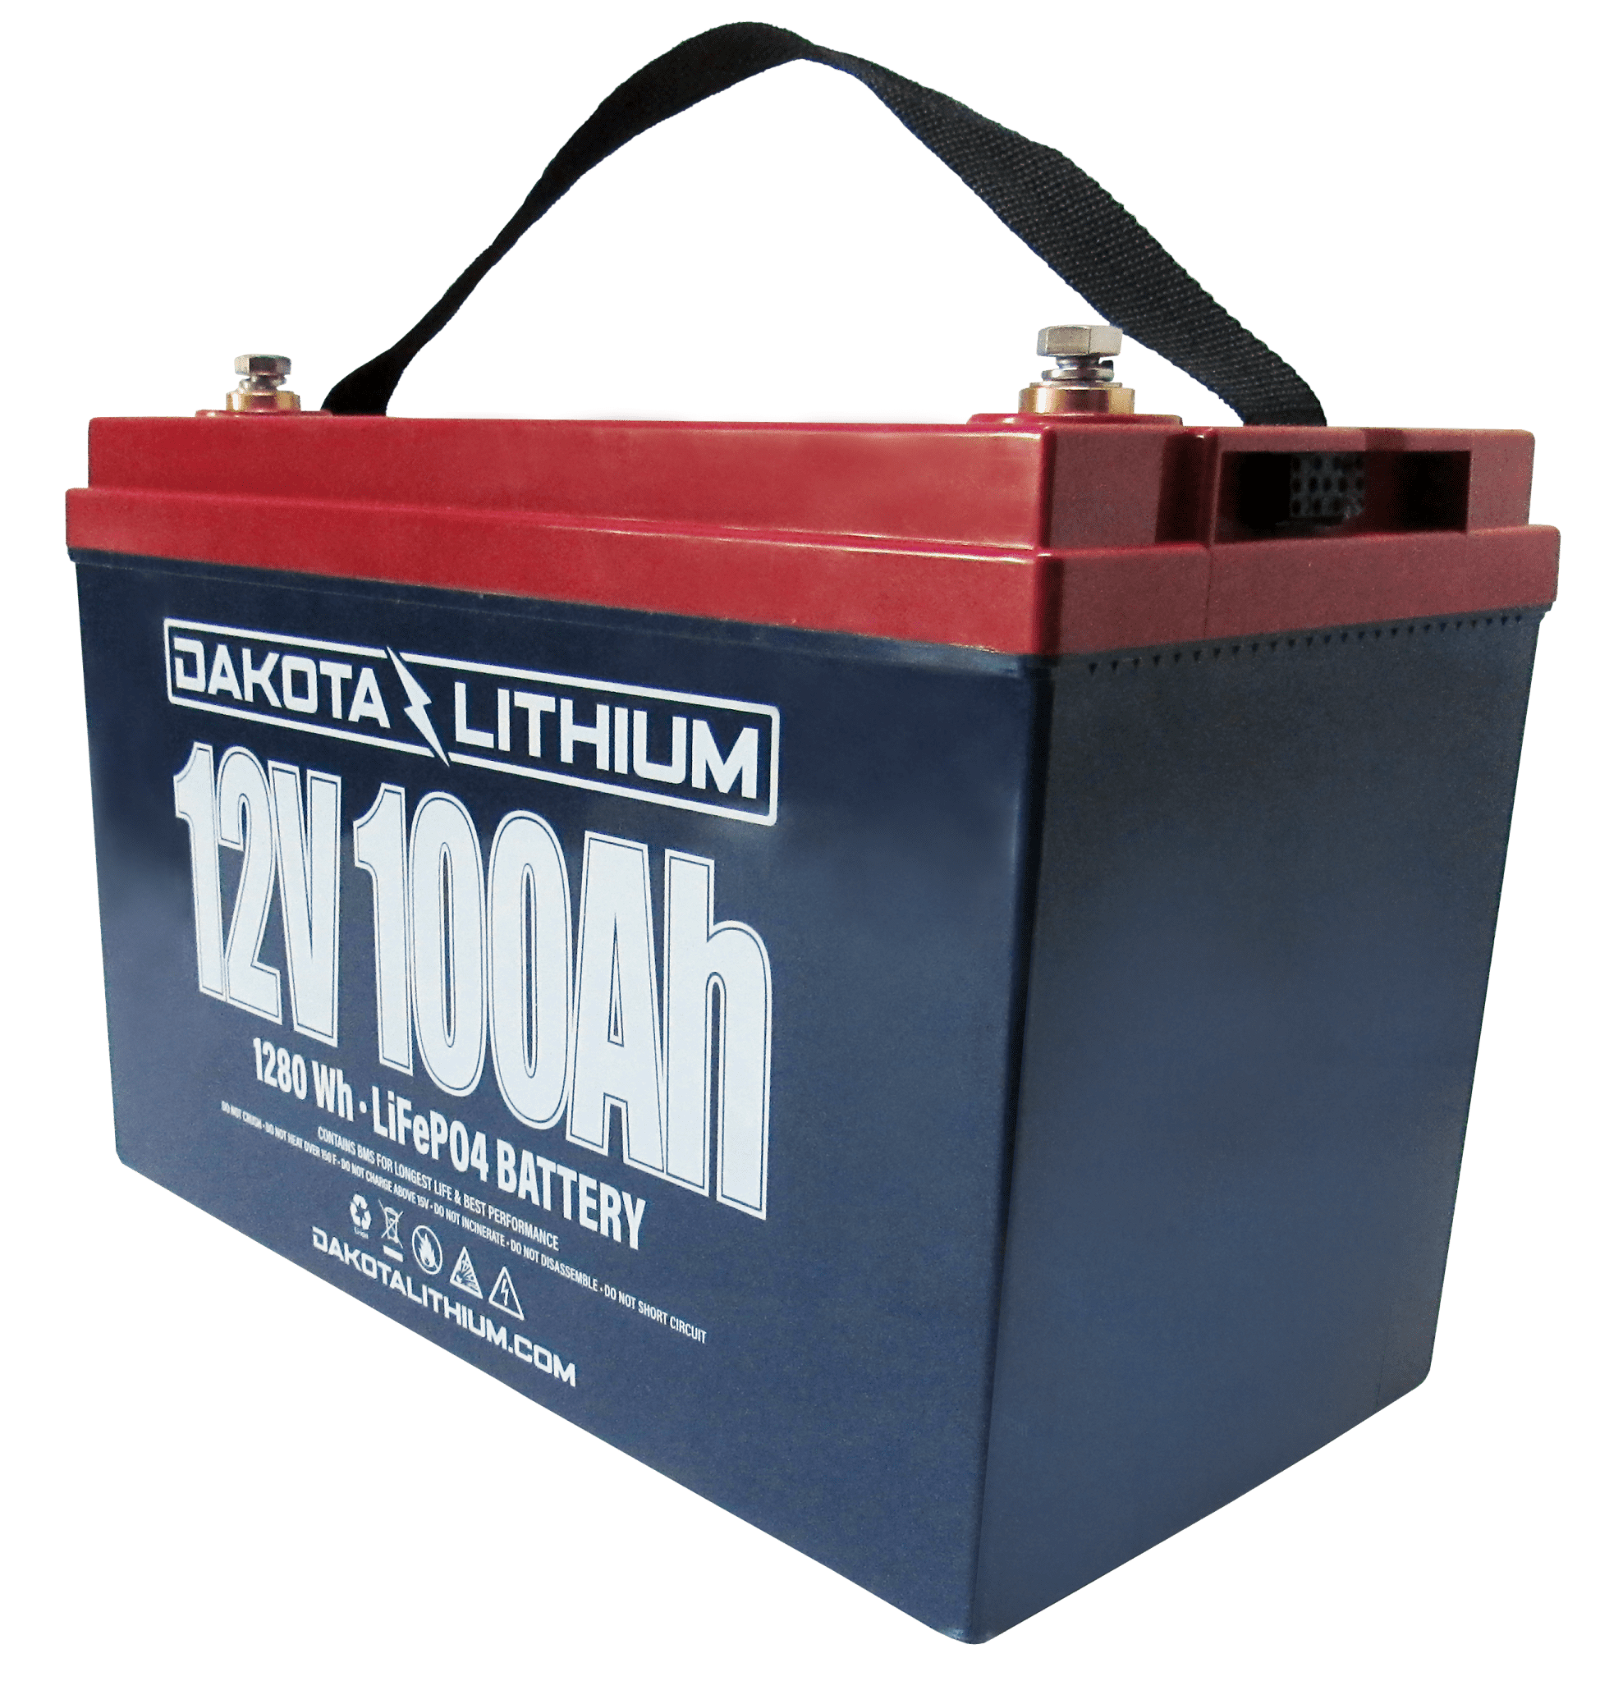 12V 100Ah LiFePO4 Battery, 100% DOD 12V Lithium Batteries with 100A BMS,  5000+ times , Perfect for RV, Camping, Solar Panel System, Off Grid,  Marine